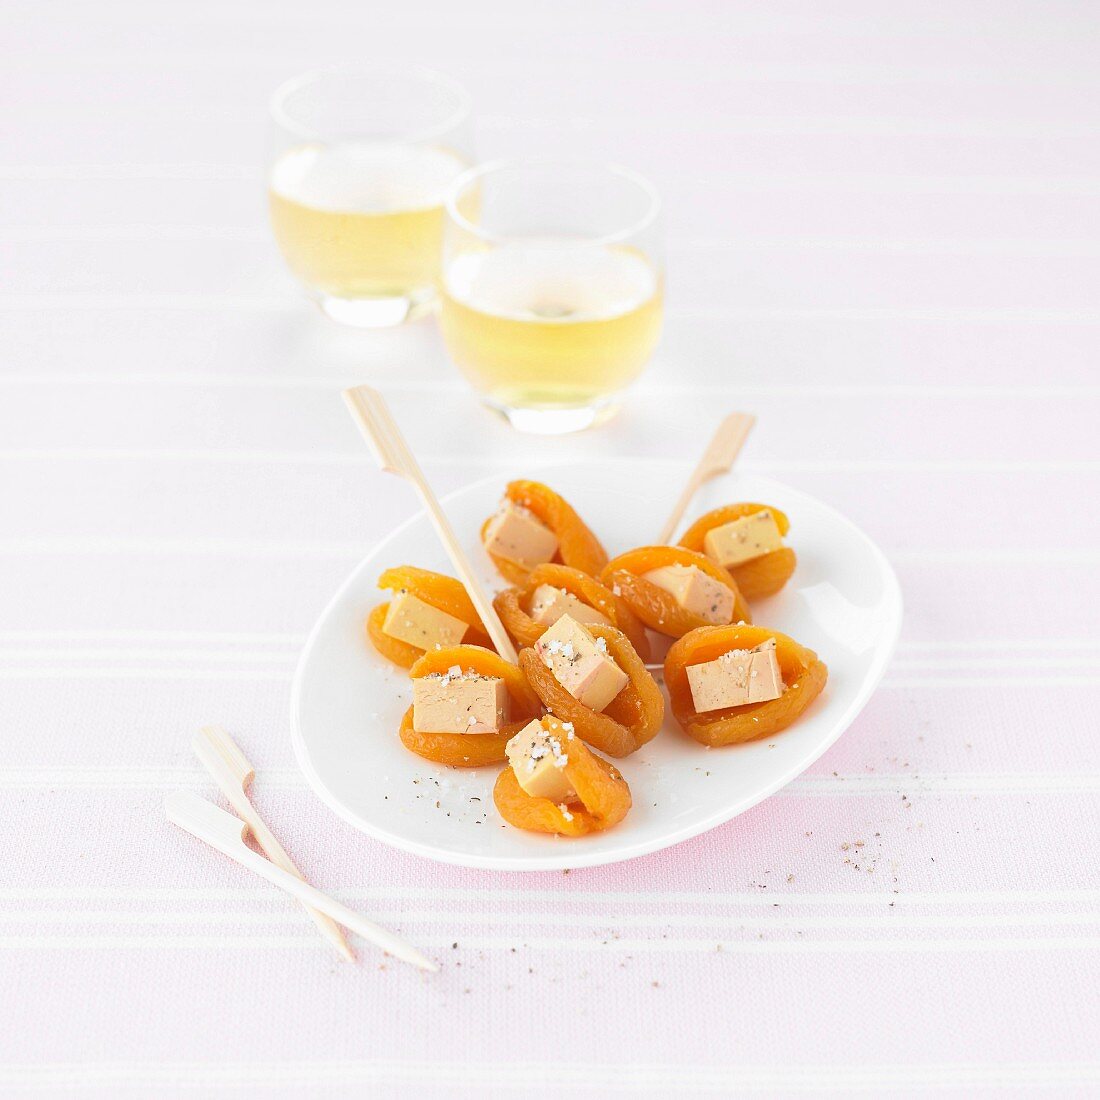 Dried apricot and foie gras bites